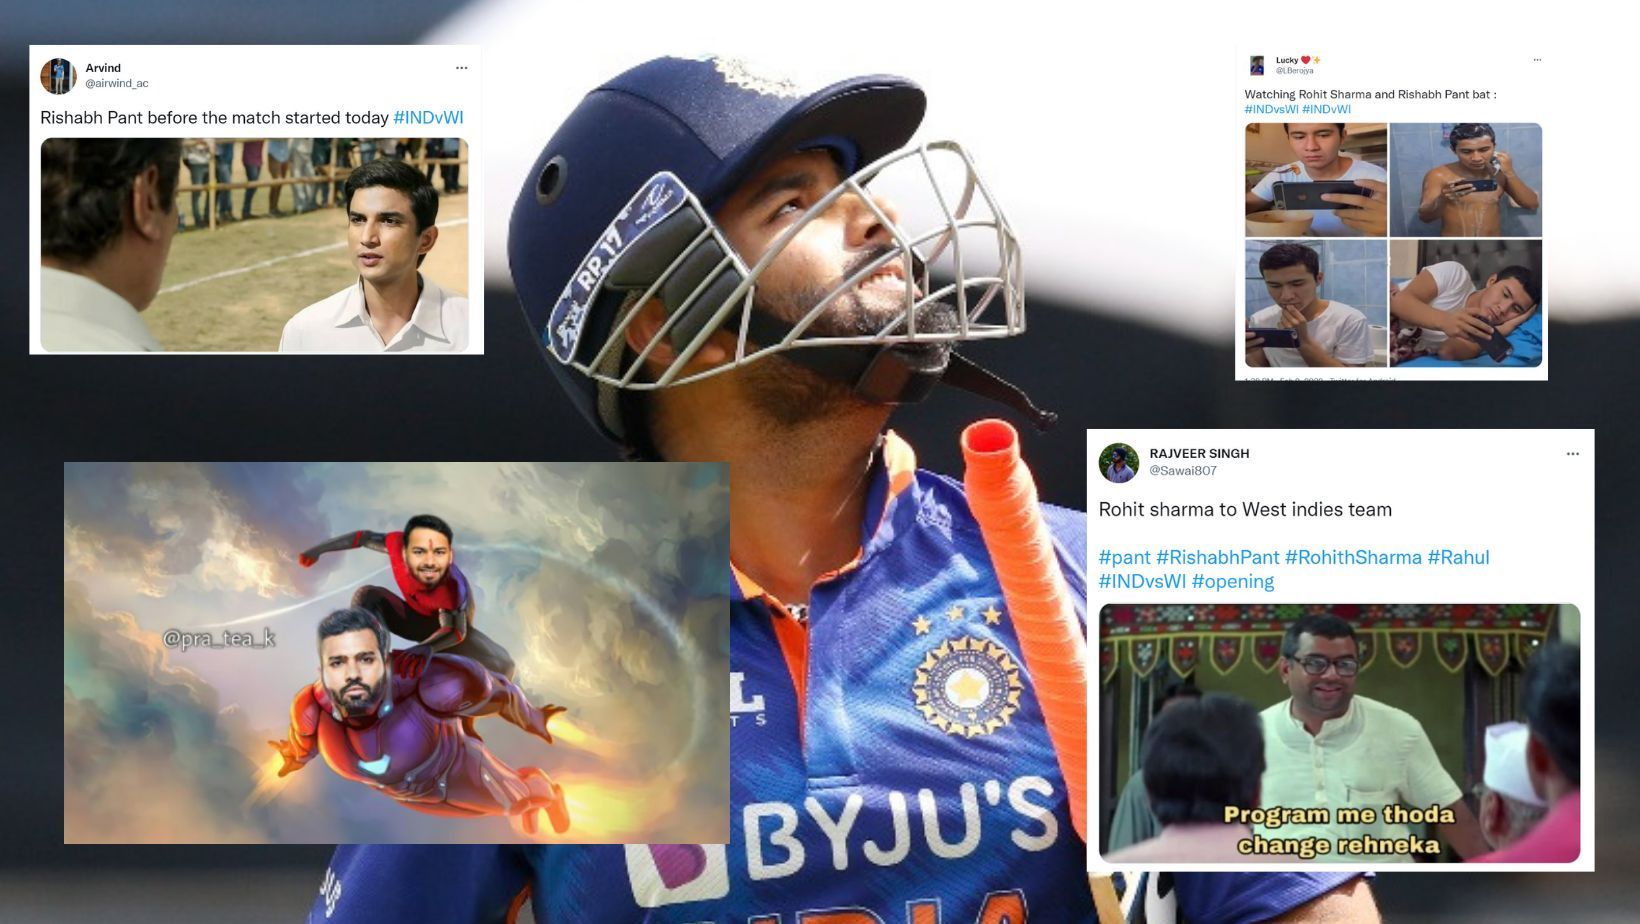 Memes galore as India opens with Rishabh Pant.